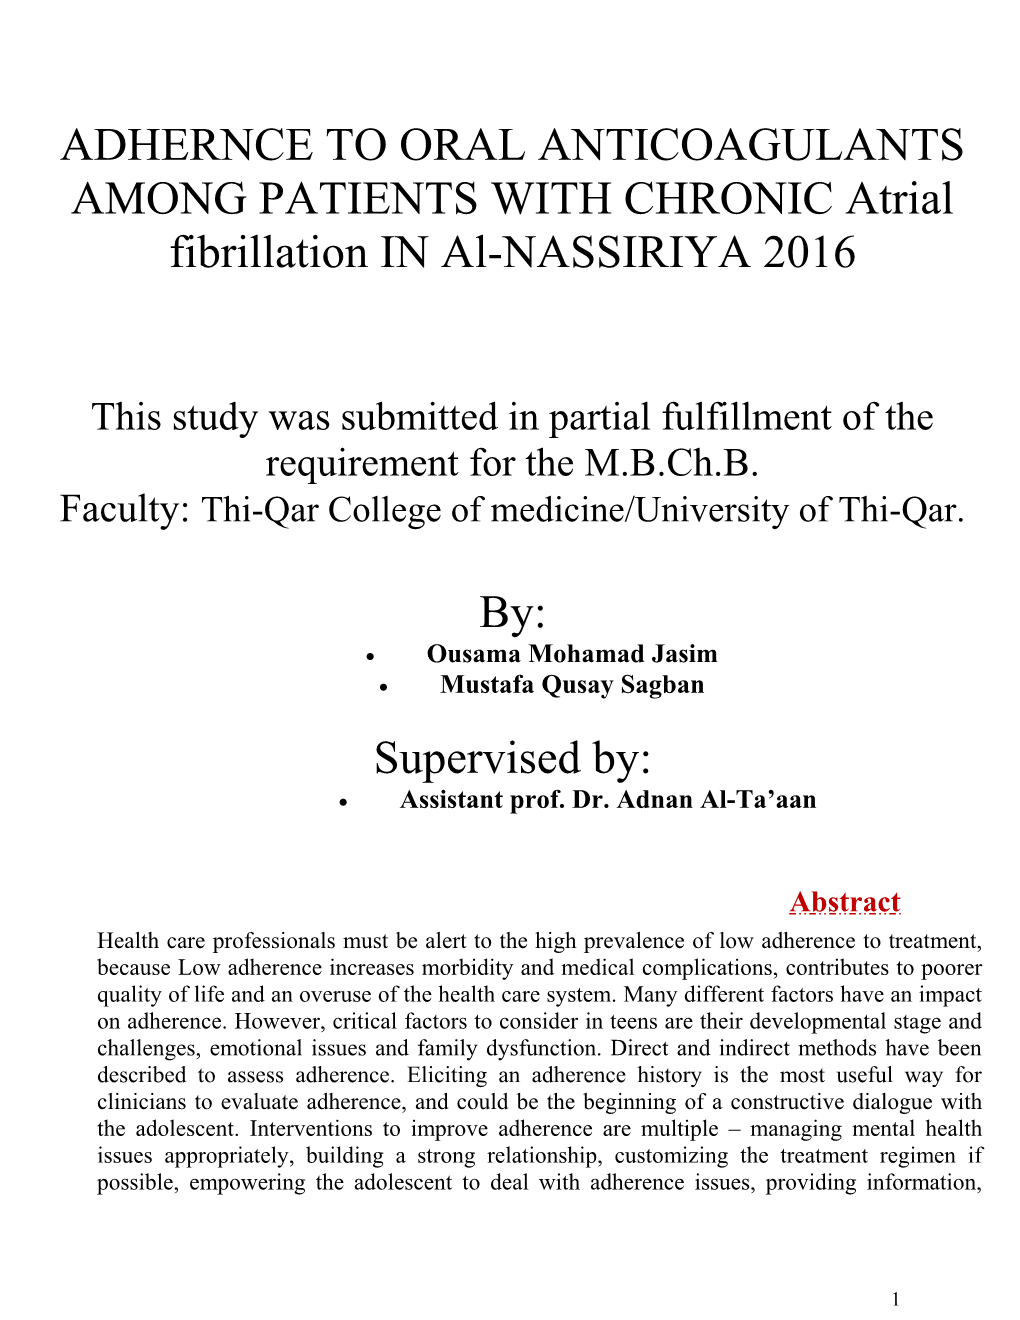 ADHERNCE to ORAL ANTICOAGULANTS AMONG PATIENTS with CHRONIC Atrial Fibrillation in Al-NASSIRIYA